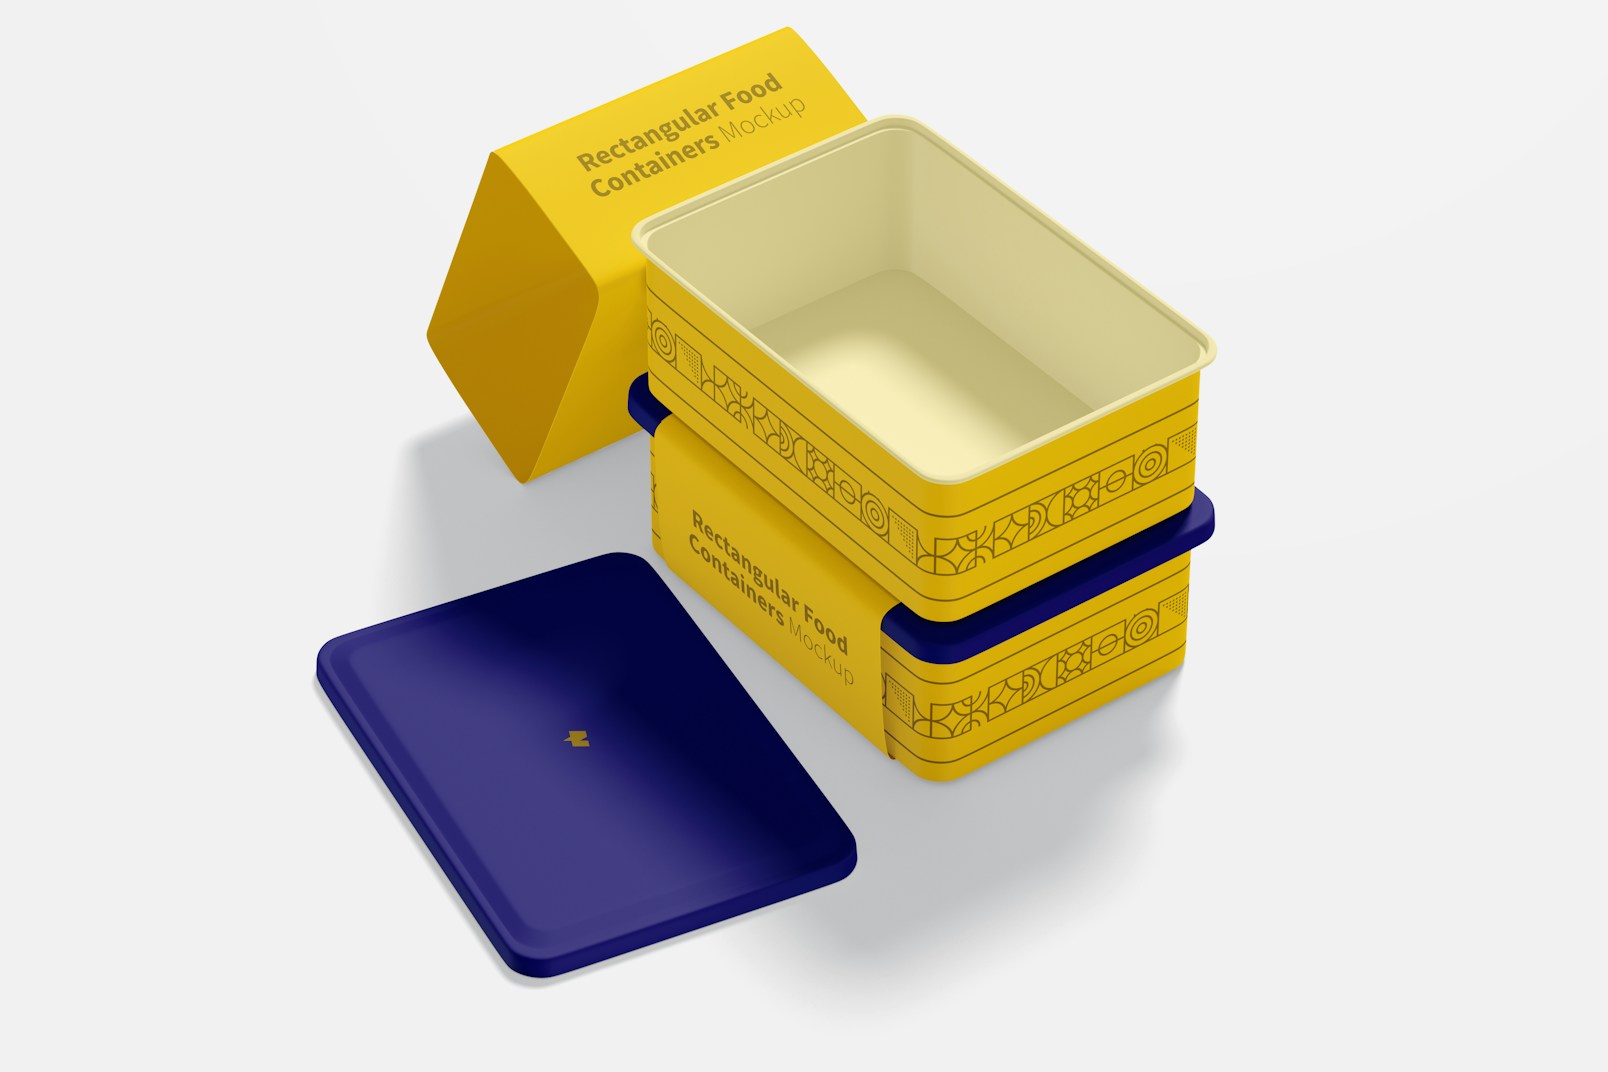 Rectangular Plastic Food Delivery Containers Mockup, Stacked